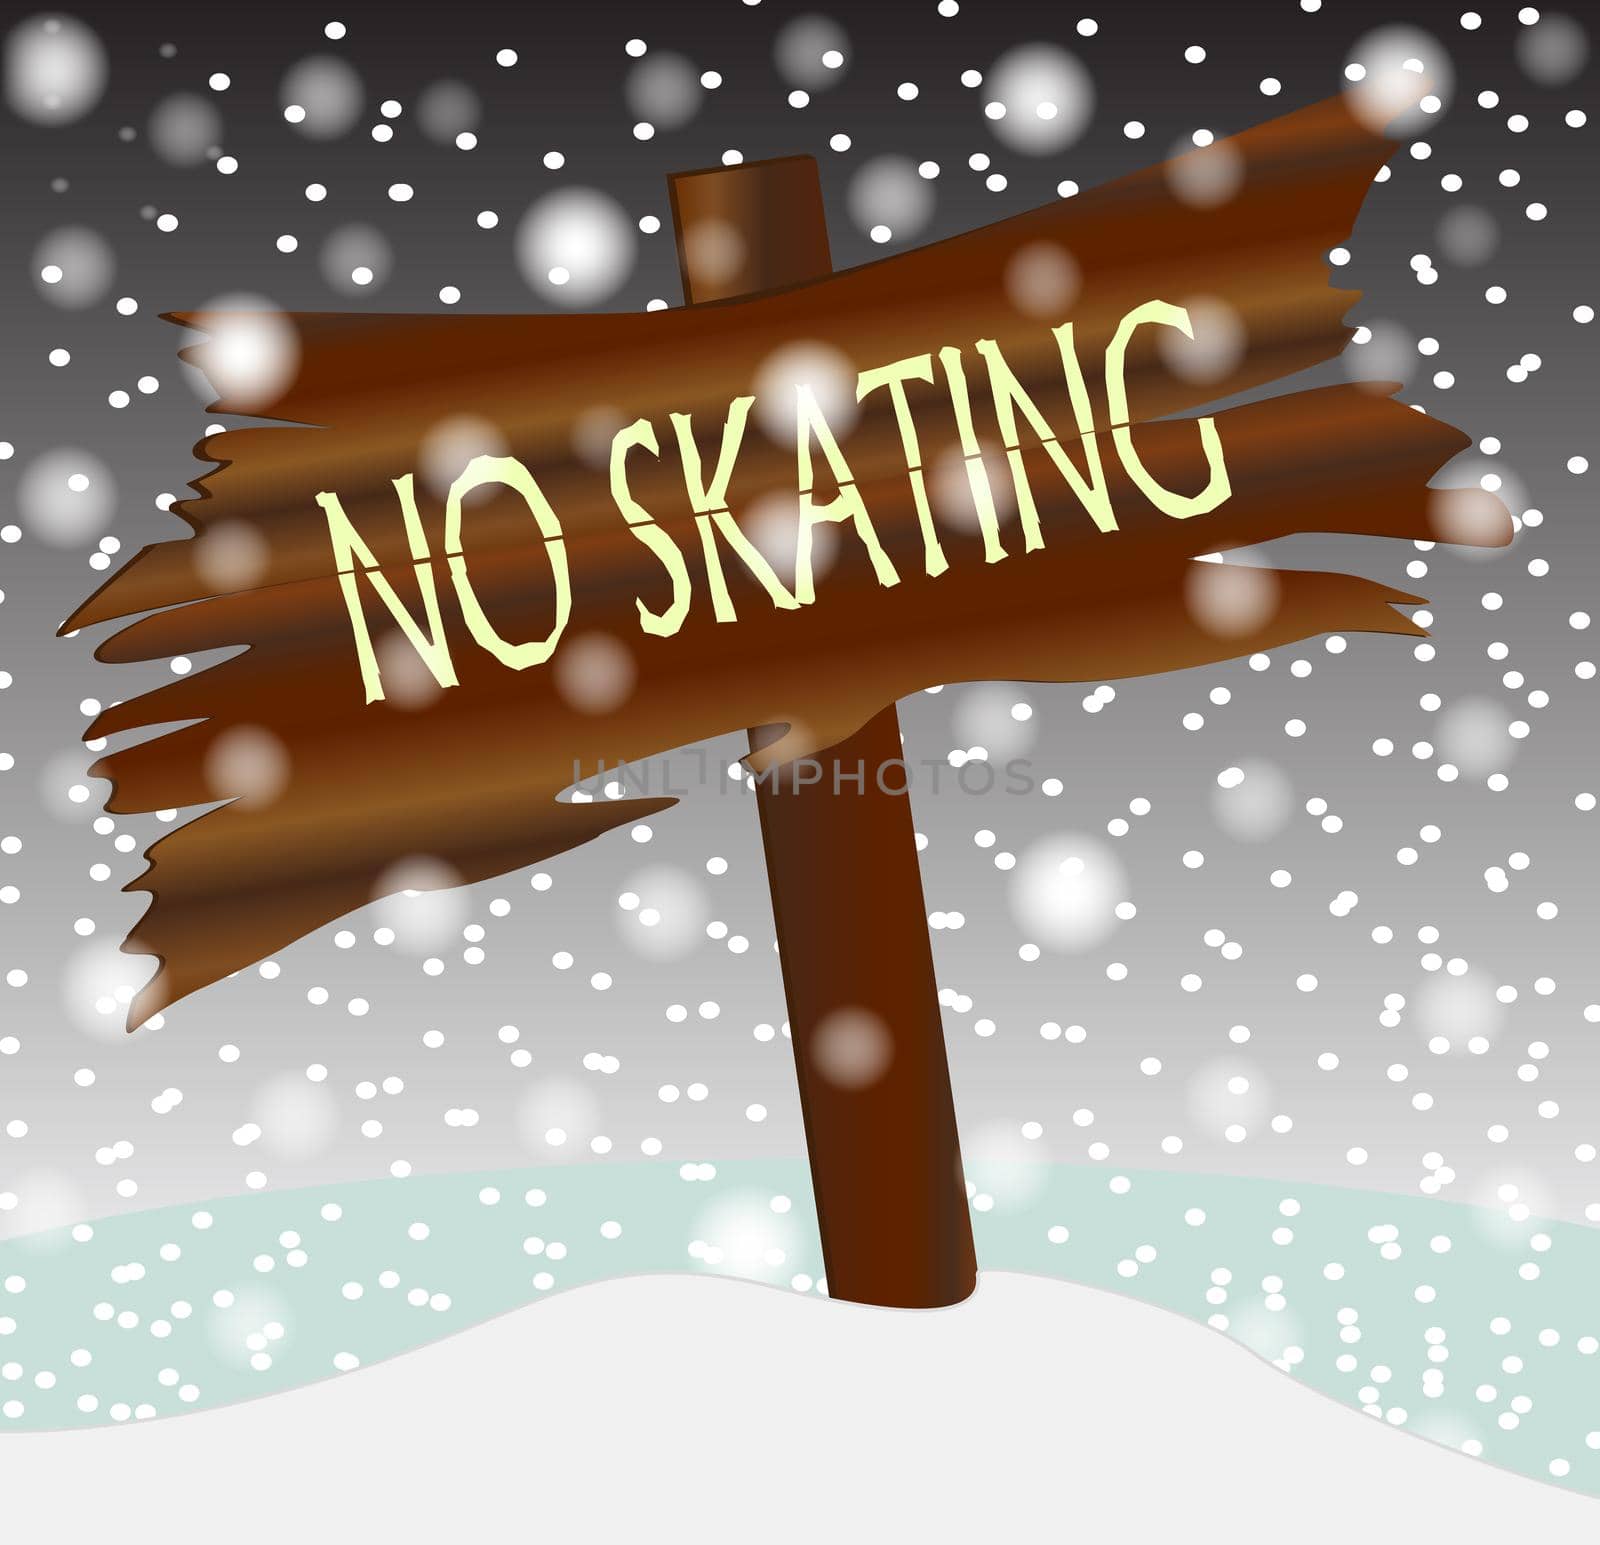 A woosen sign with the text No Skating in a winter snowstorm